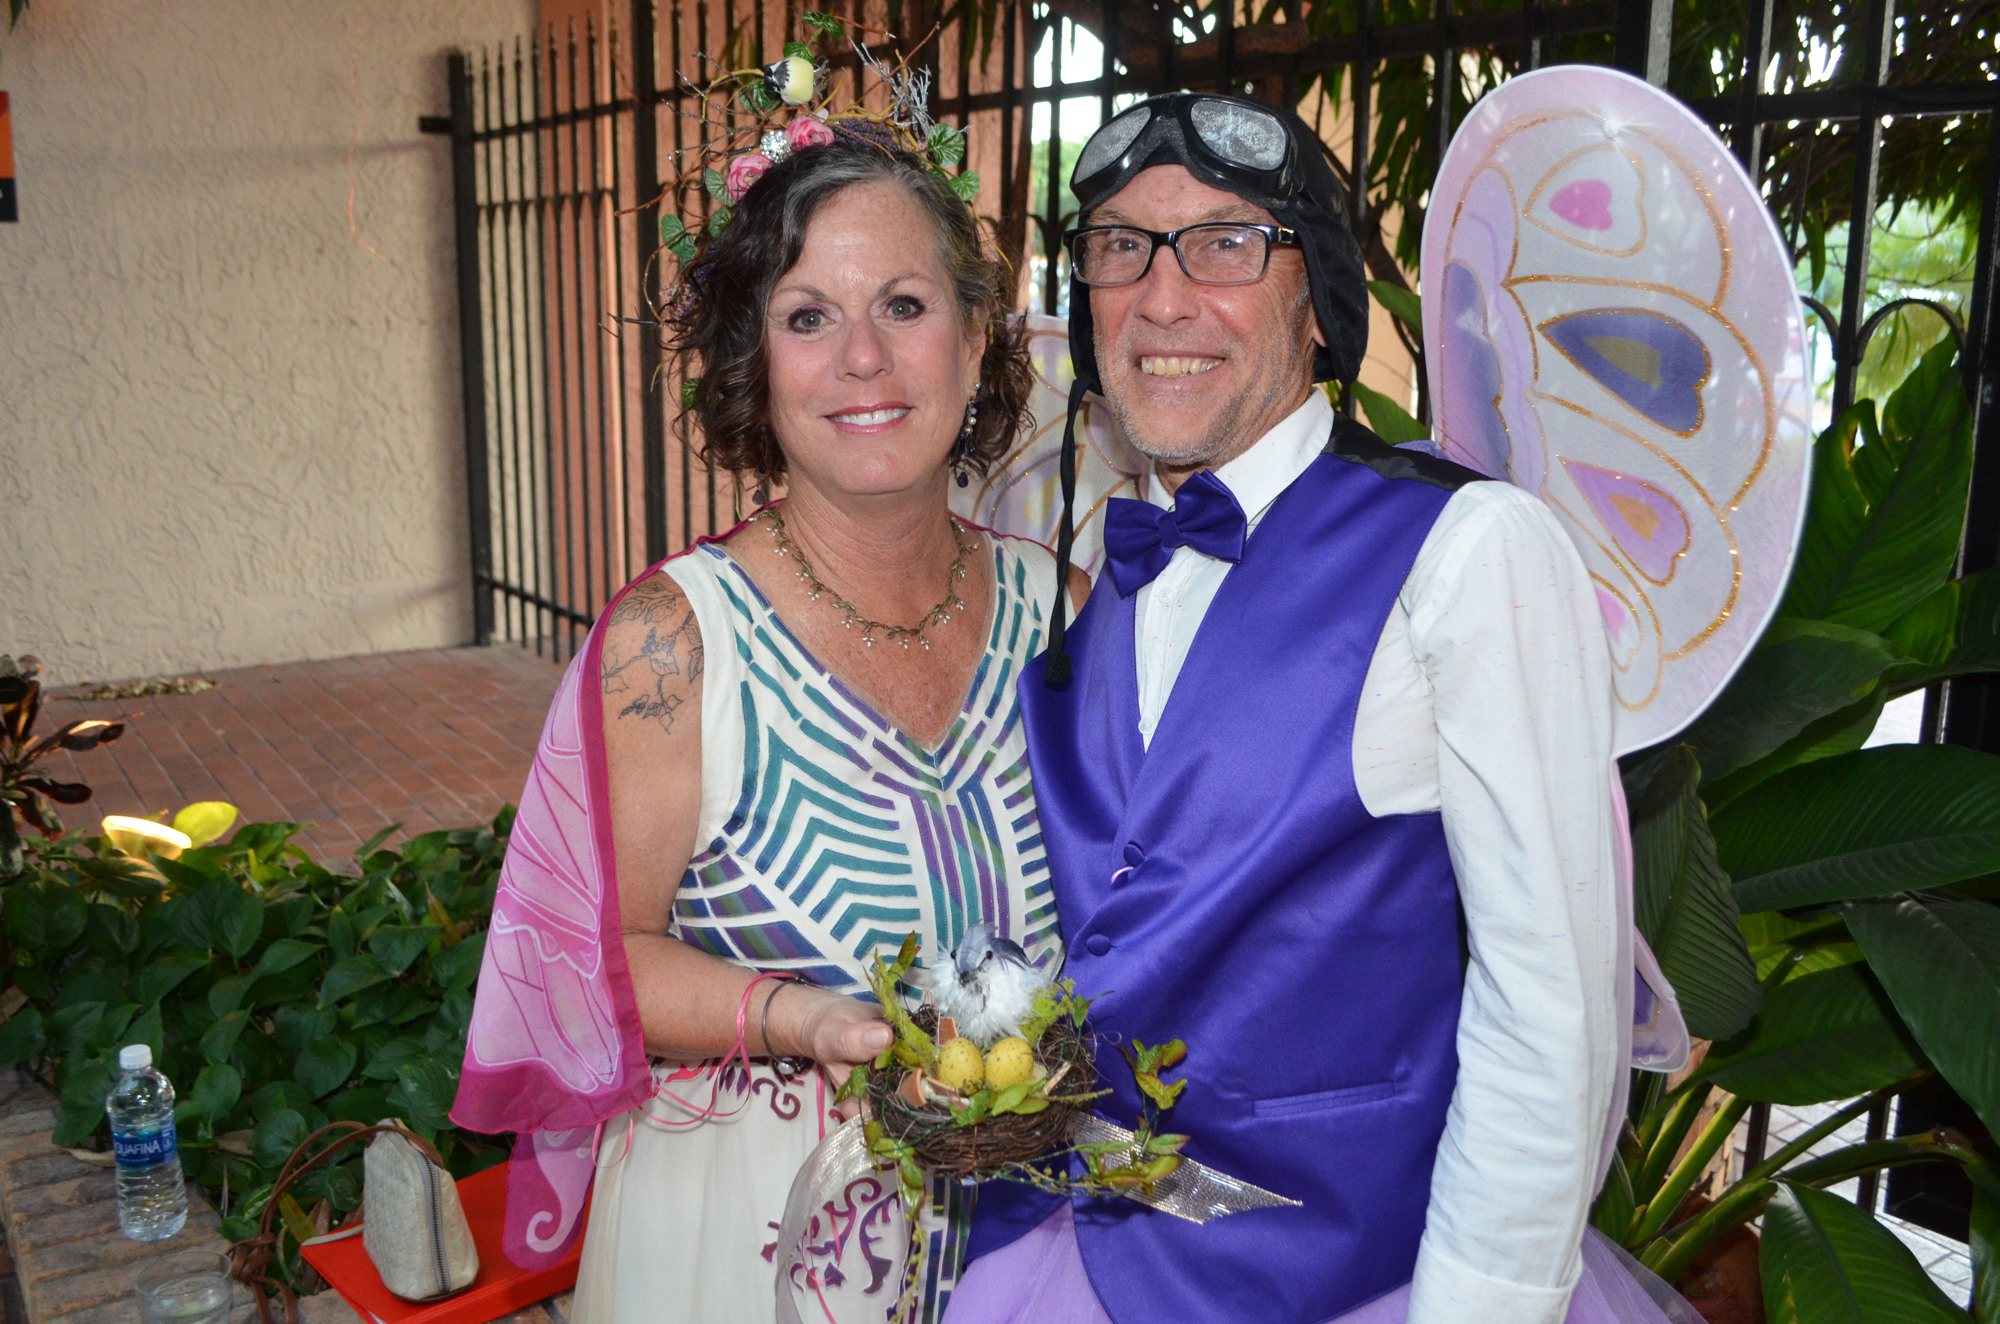 Lisa Kates and Richard LaBrie show off their costumes at Fairytale Ball on March 25 at Michael's On East. Photo by Niki Kottmann